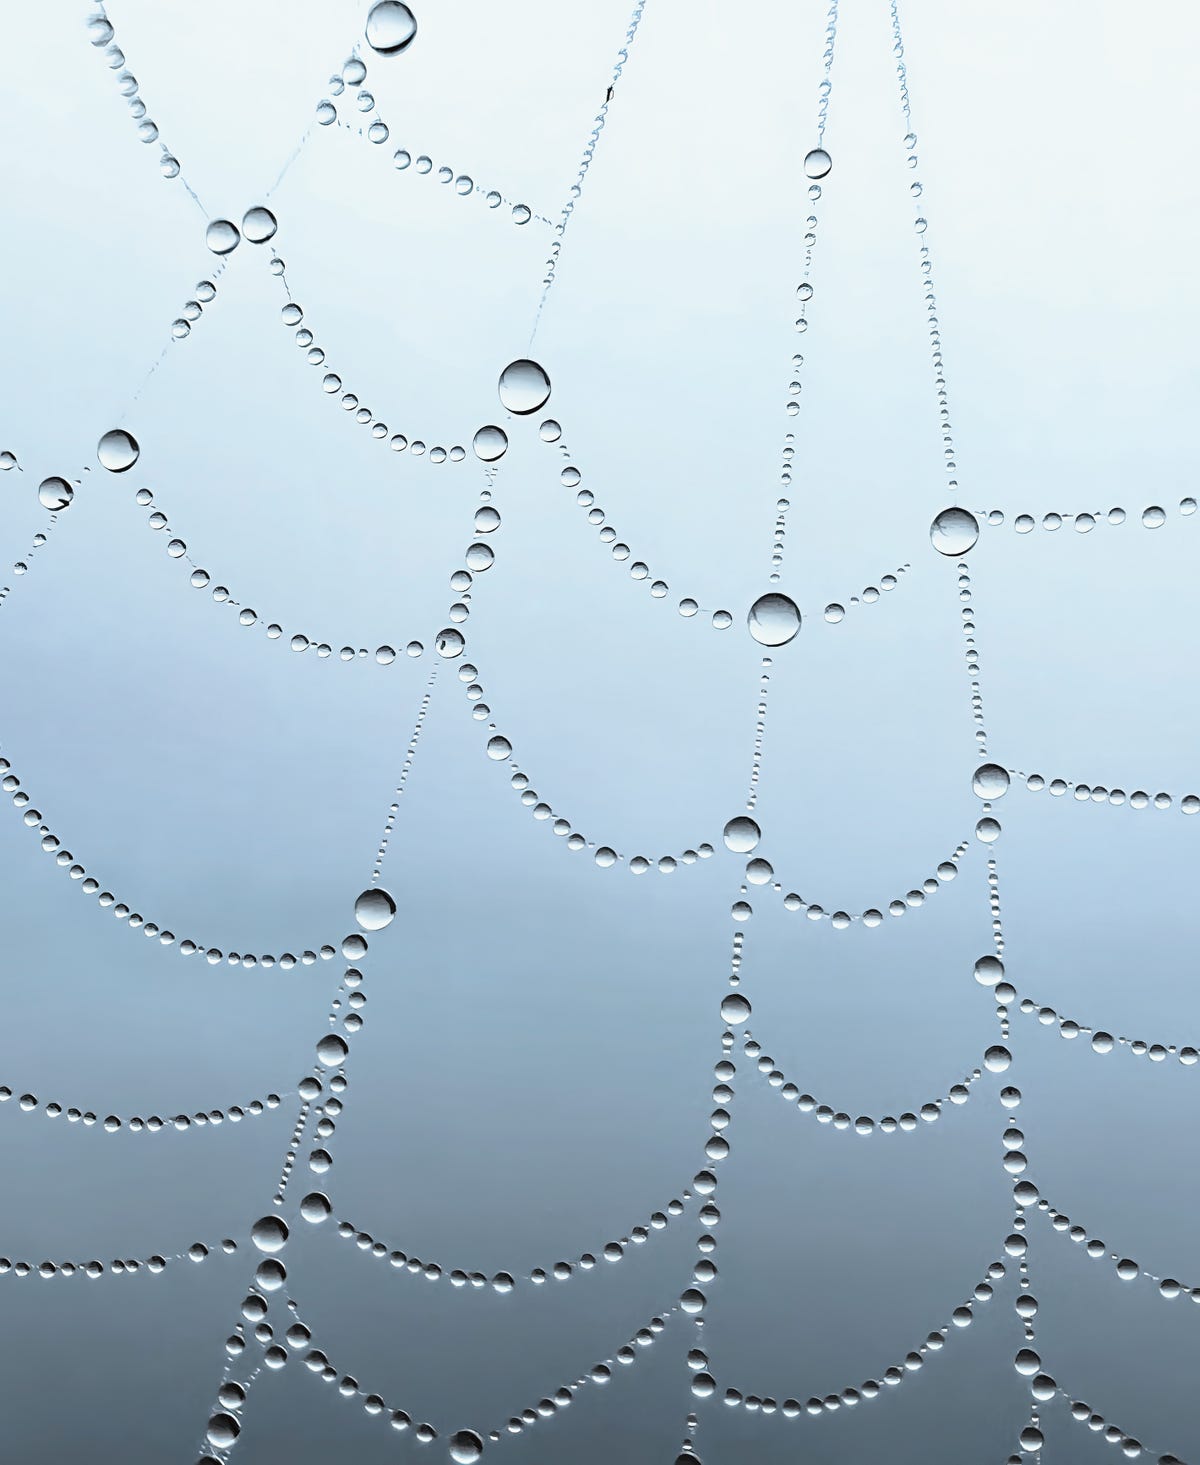 Dew drops captured on a spider's web.